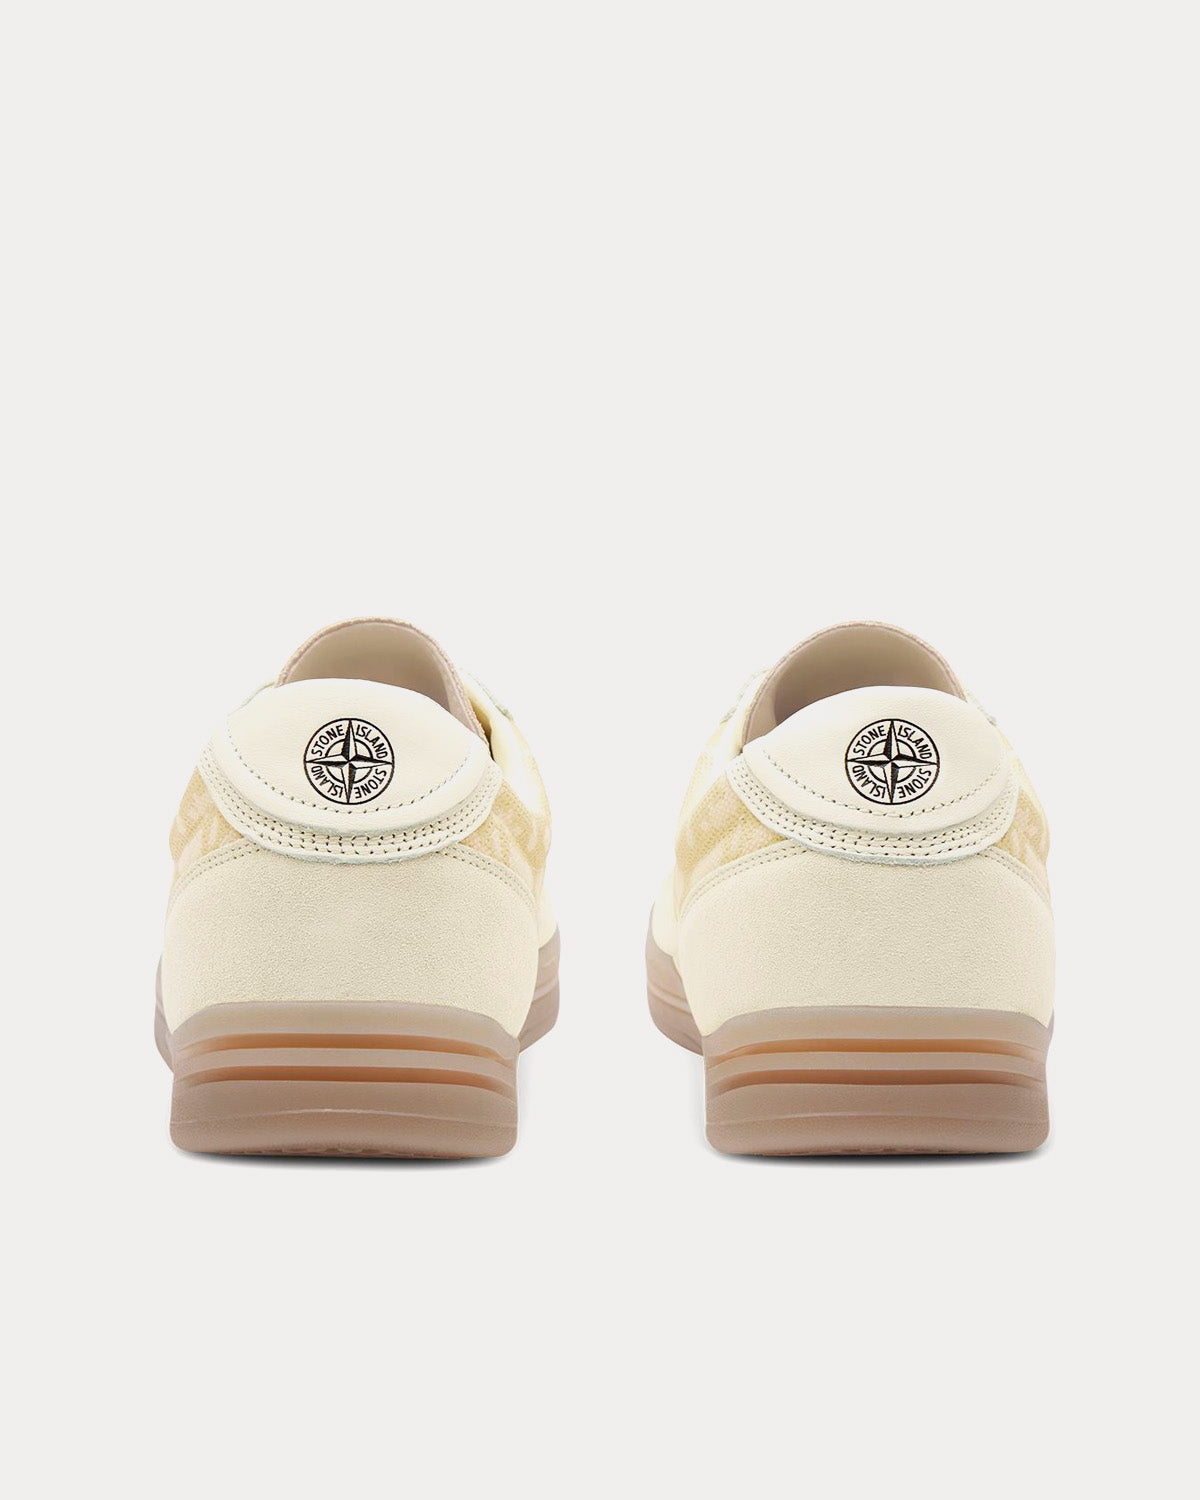 Stone Island - S0101 Ivory Low Top Sneakers